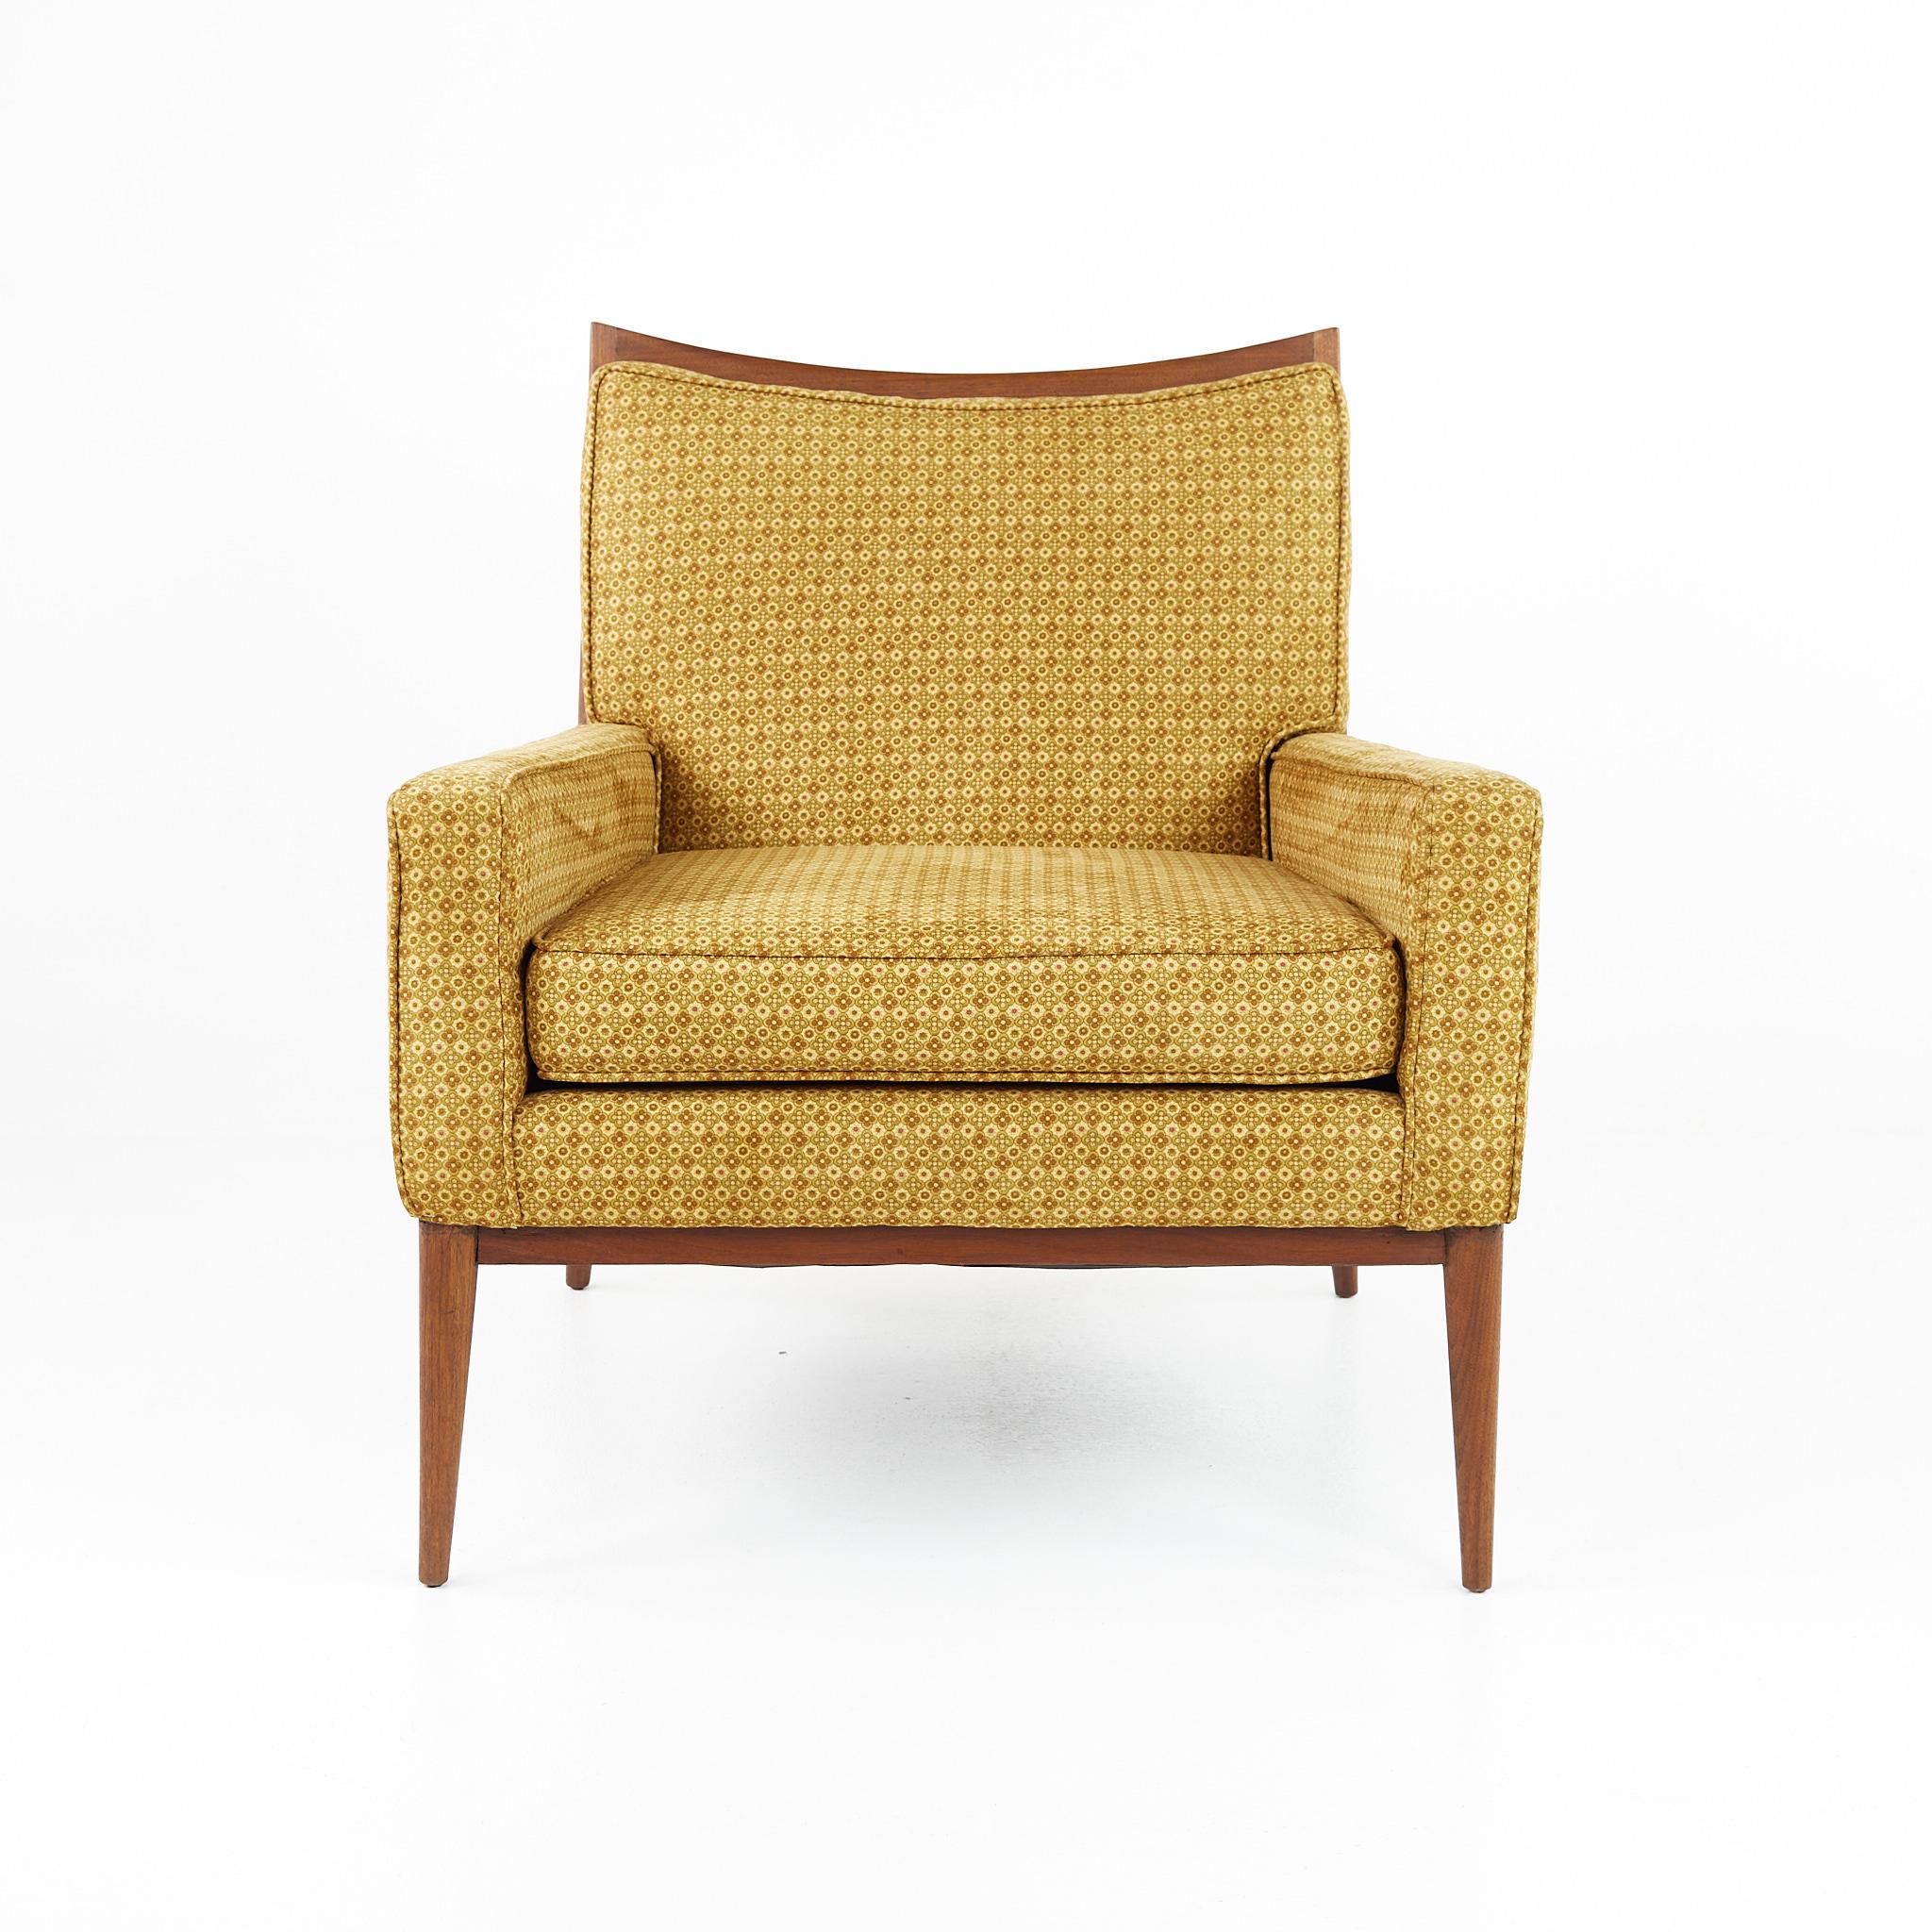 Paul McCobb for Directional mid century lounge chair

This chair measures: 29 wide x 29.5 deep x 32.5 inches high, with a seat height of 17.5 and arm height of 21.5 inches

Ready for new upholstery. This service is available for an additional